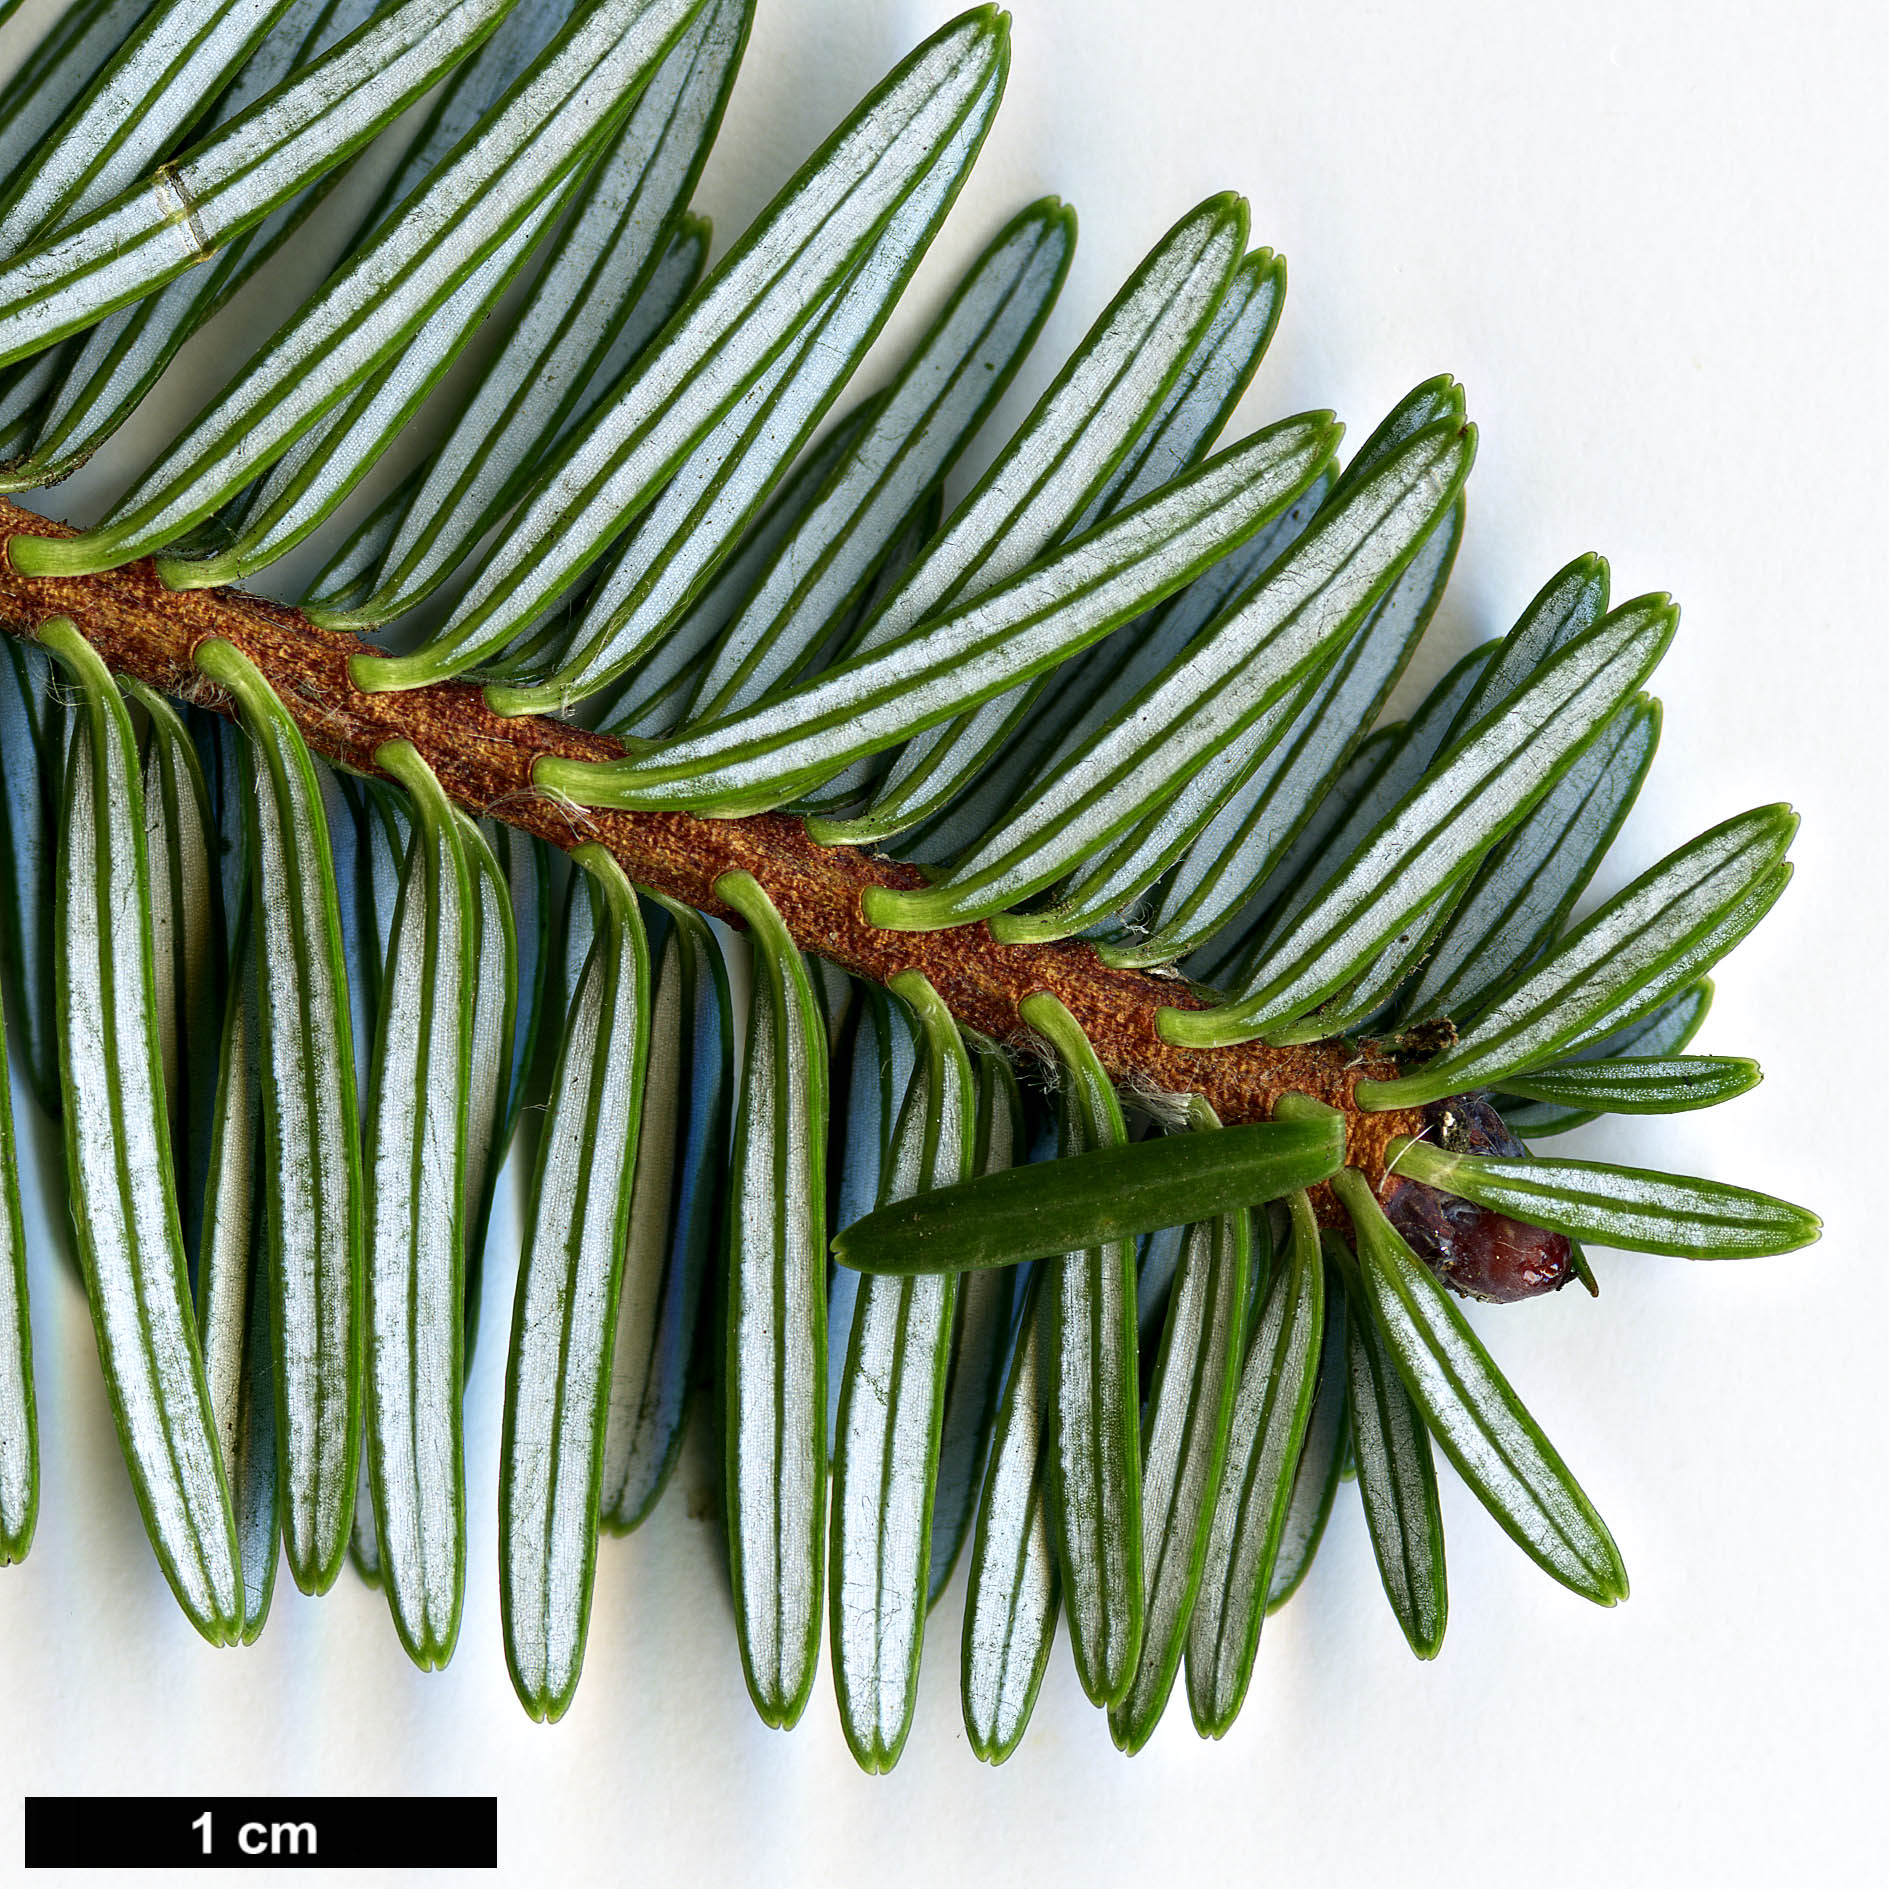 High resolution image: Family: Pinaceae - Genus: Abies - Taxon: forrestii